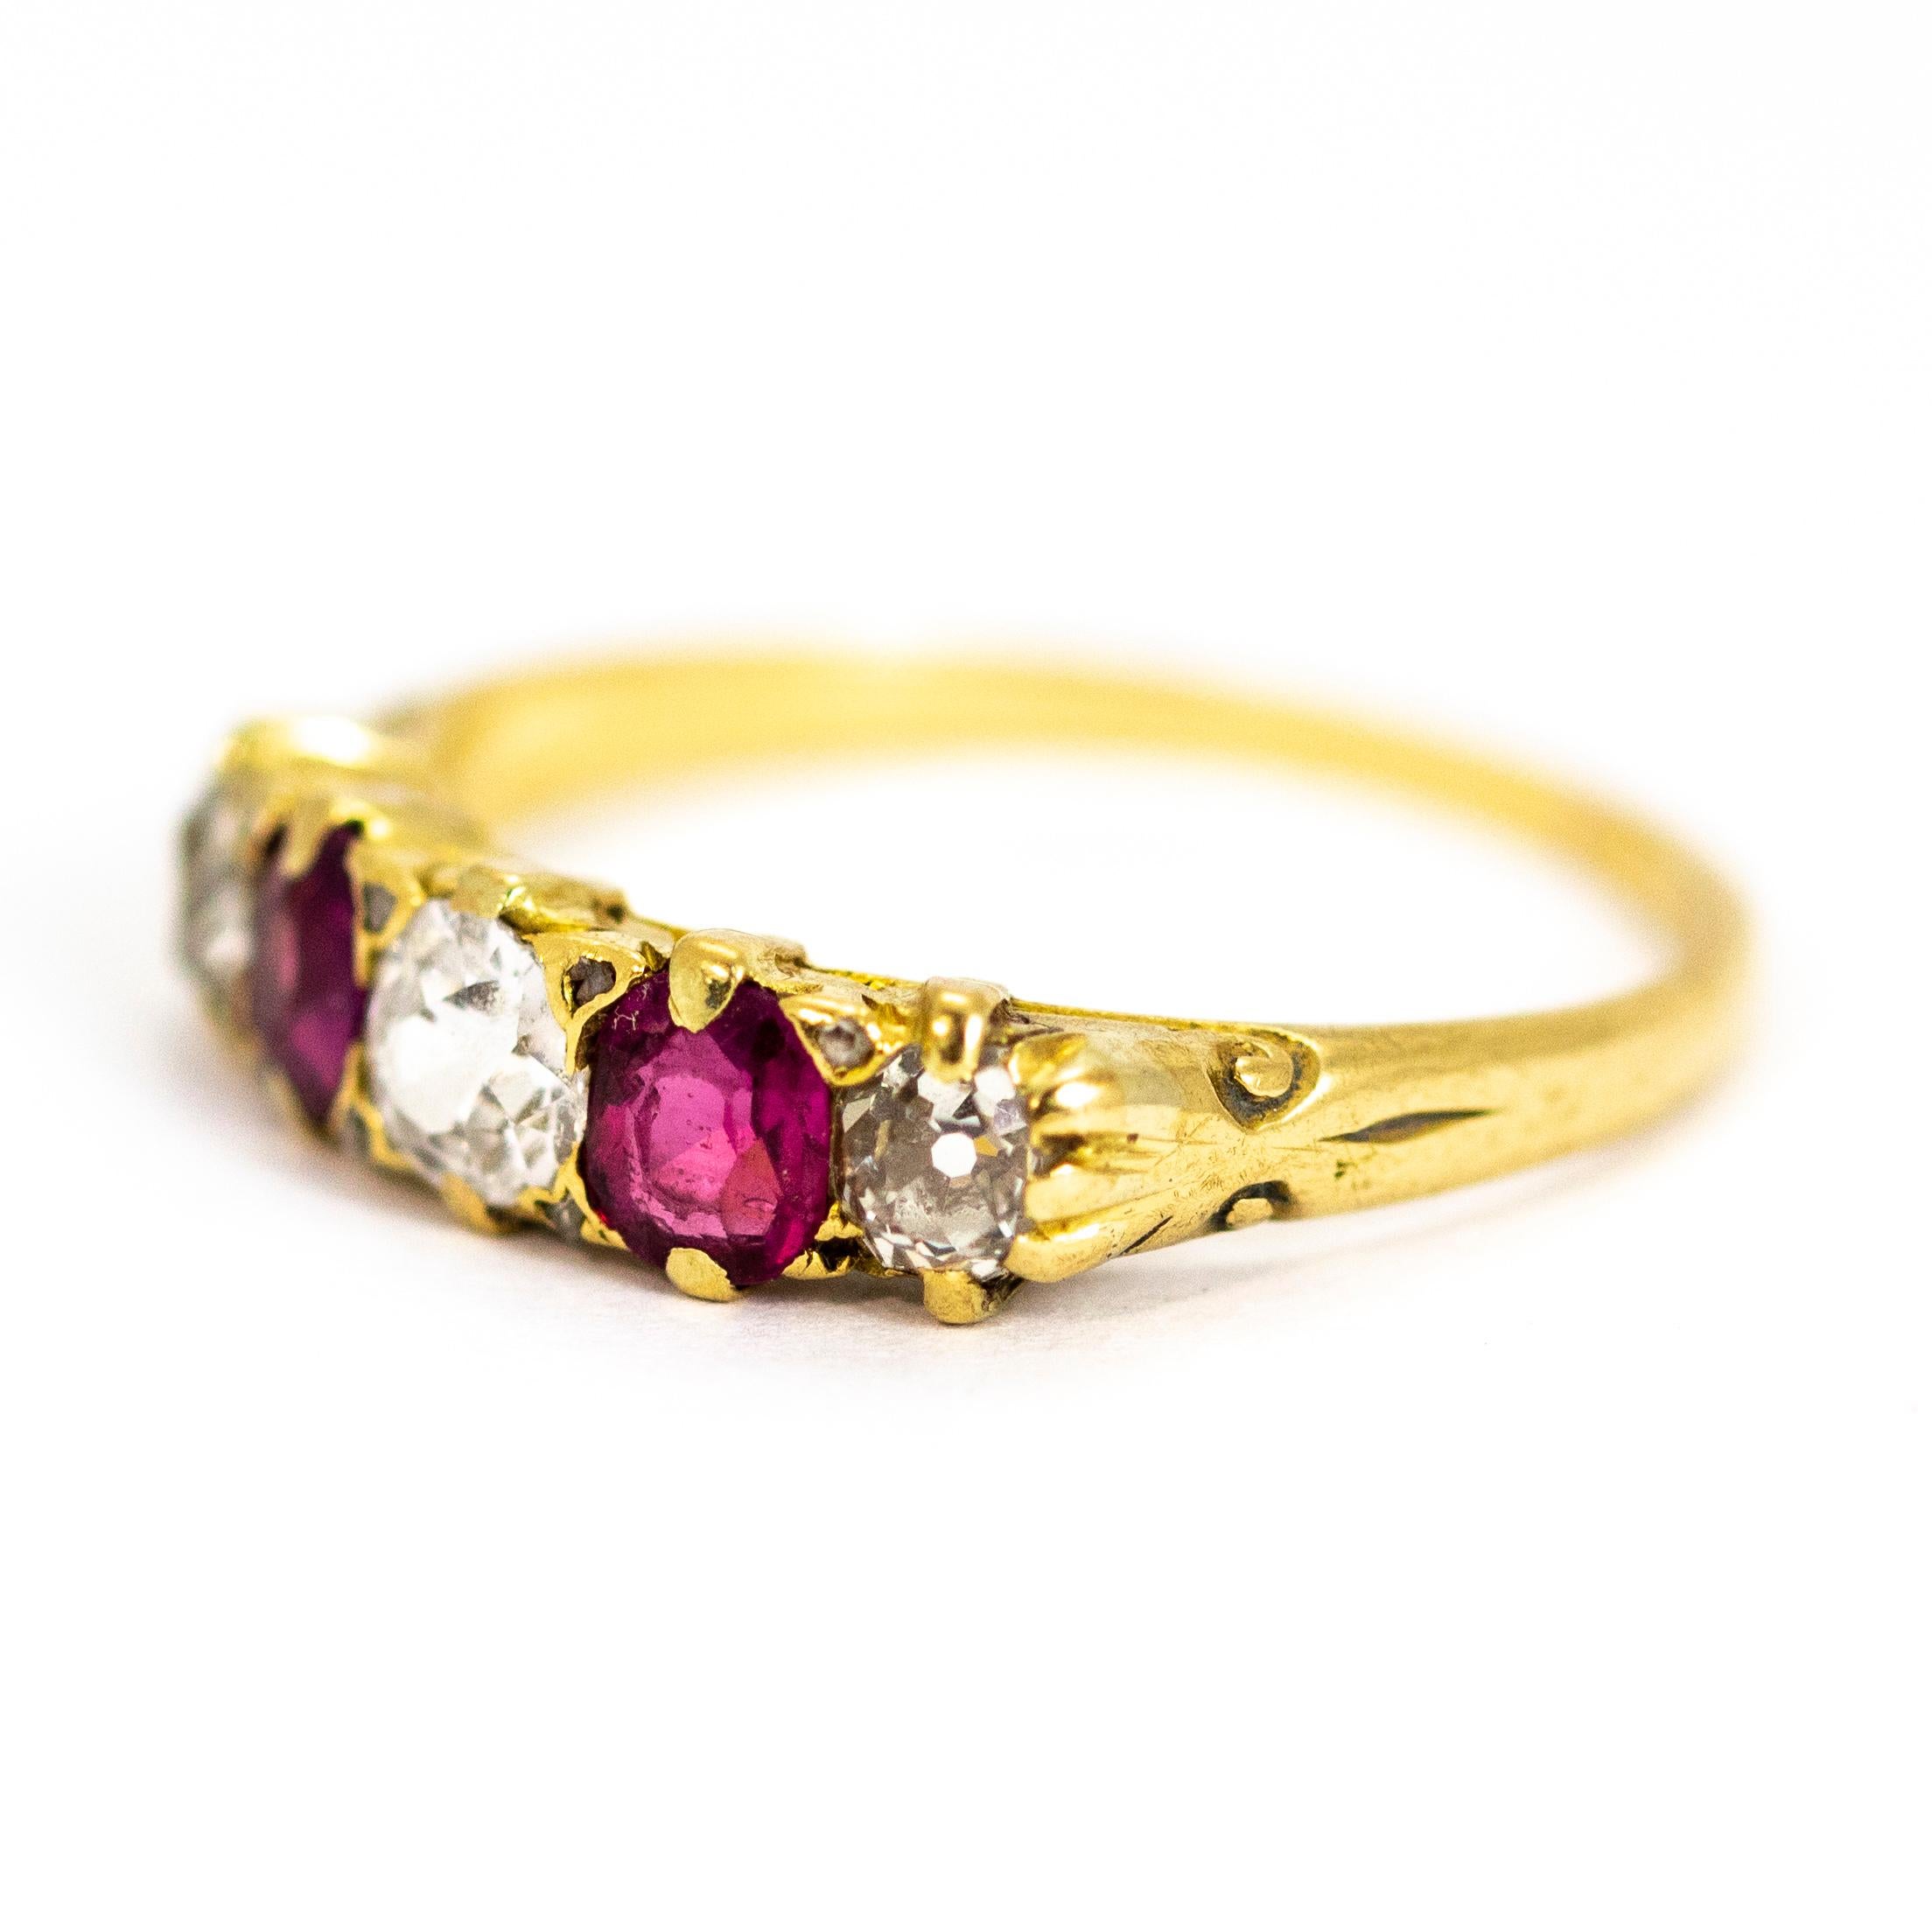 An exquisite vintage five-stone ring set with diamonds and rubies. The central diamonds measures 45 points, G colour and VVSI clarity. This superb stone is flanked by a pair of beautiful rubies, and then another pair of 20 point diamonds. Between